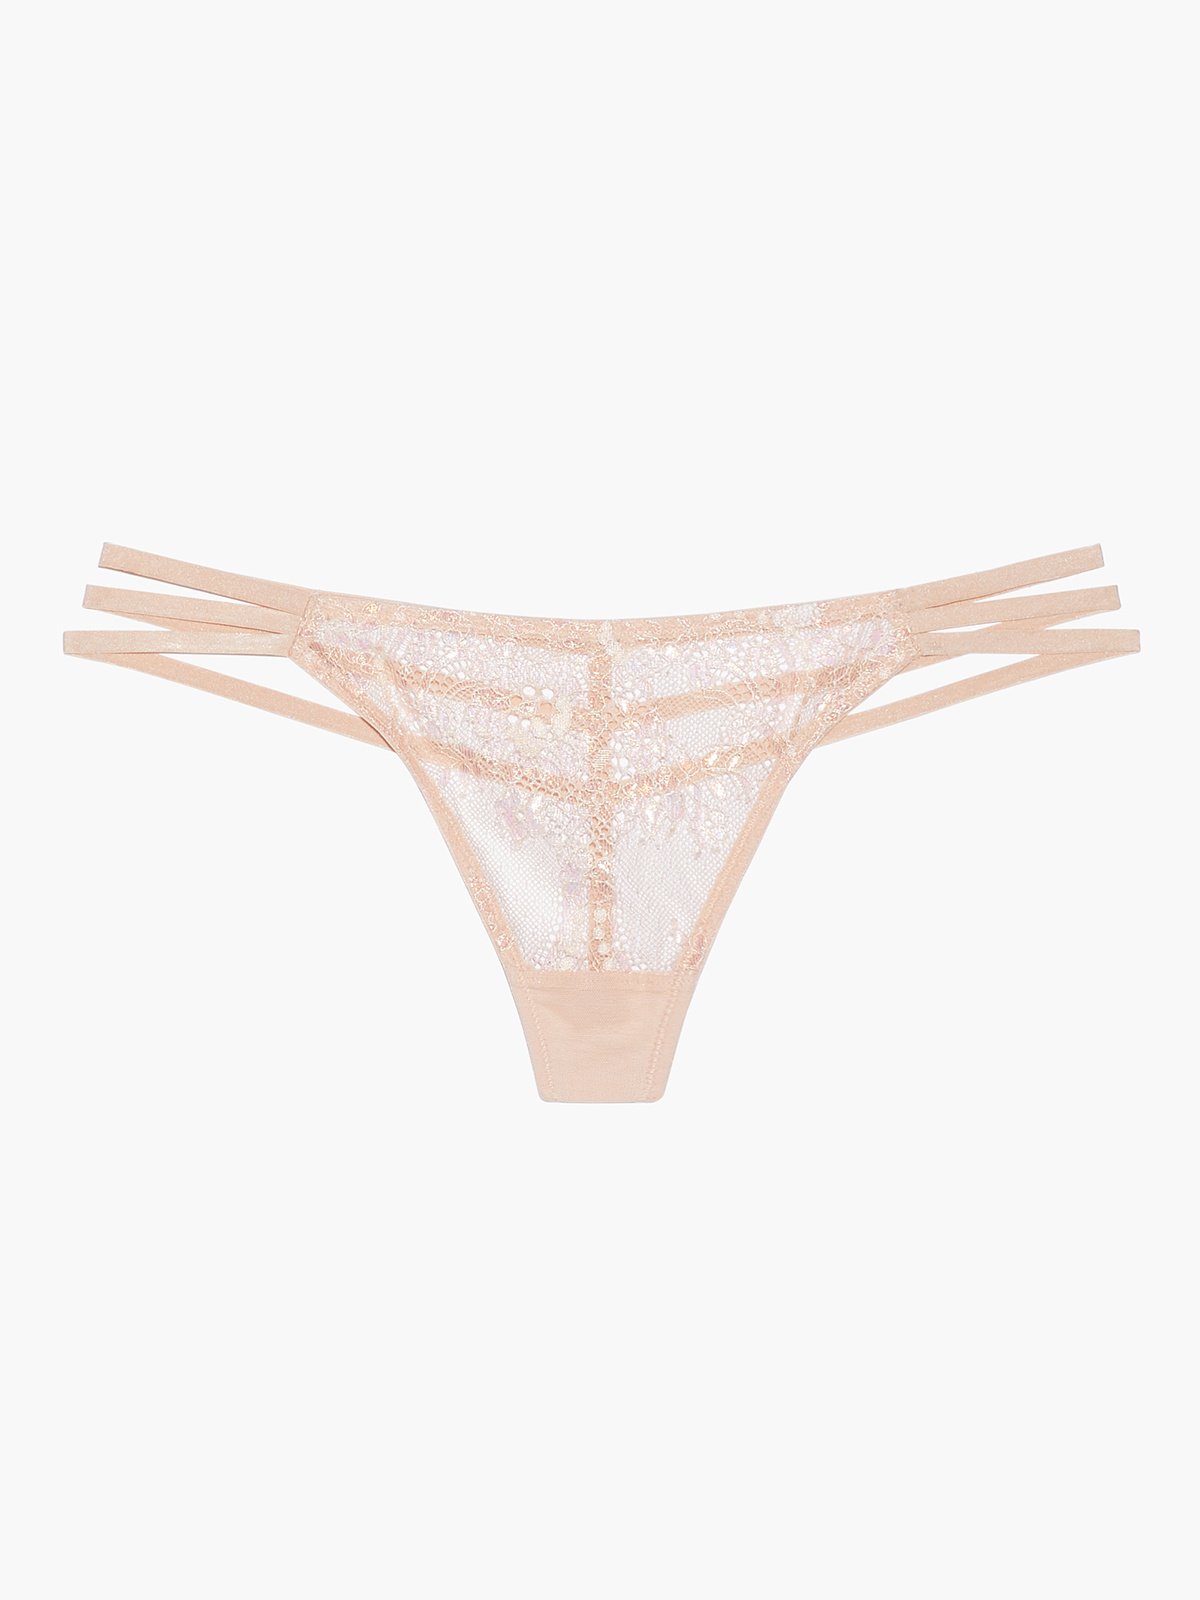 Hyper Real Metallic Lace Strappy G-String in Pink